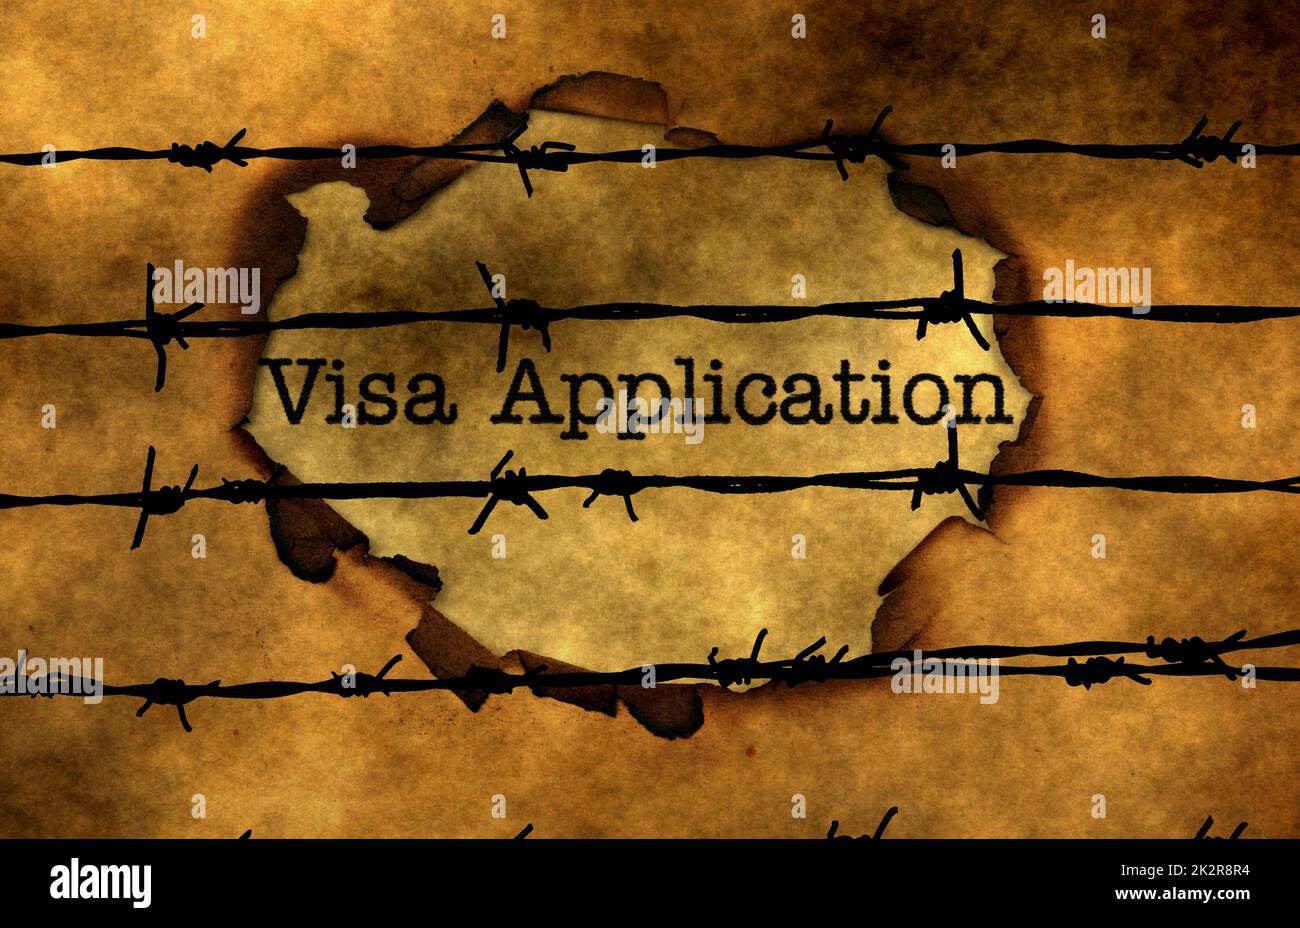 Visa application concept against barbwire Stock Photo